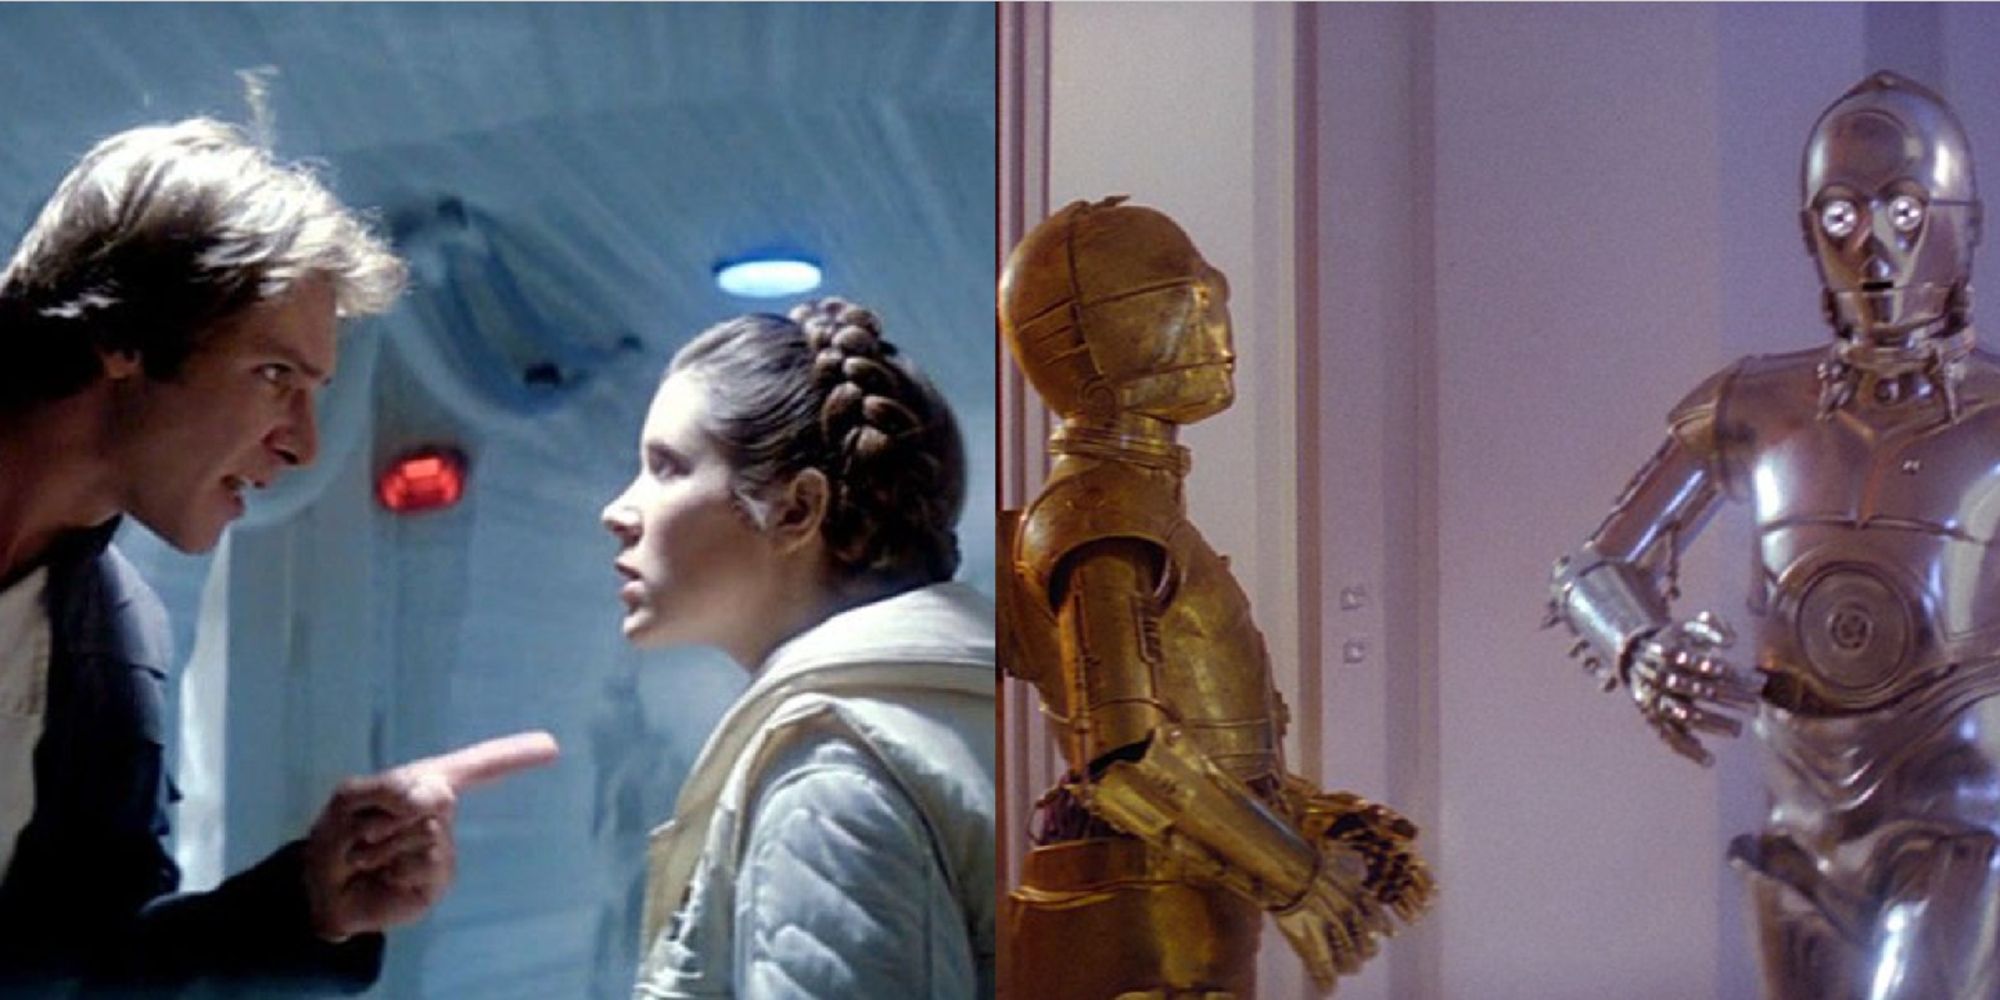 10 Profanities Used In The Star Wars Galaxy (& What They Mean), According To Reddit